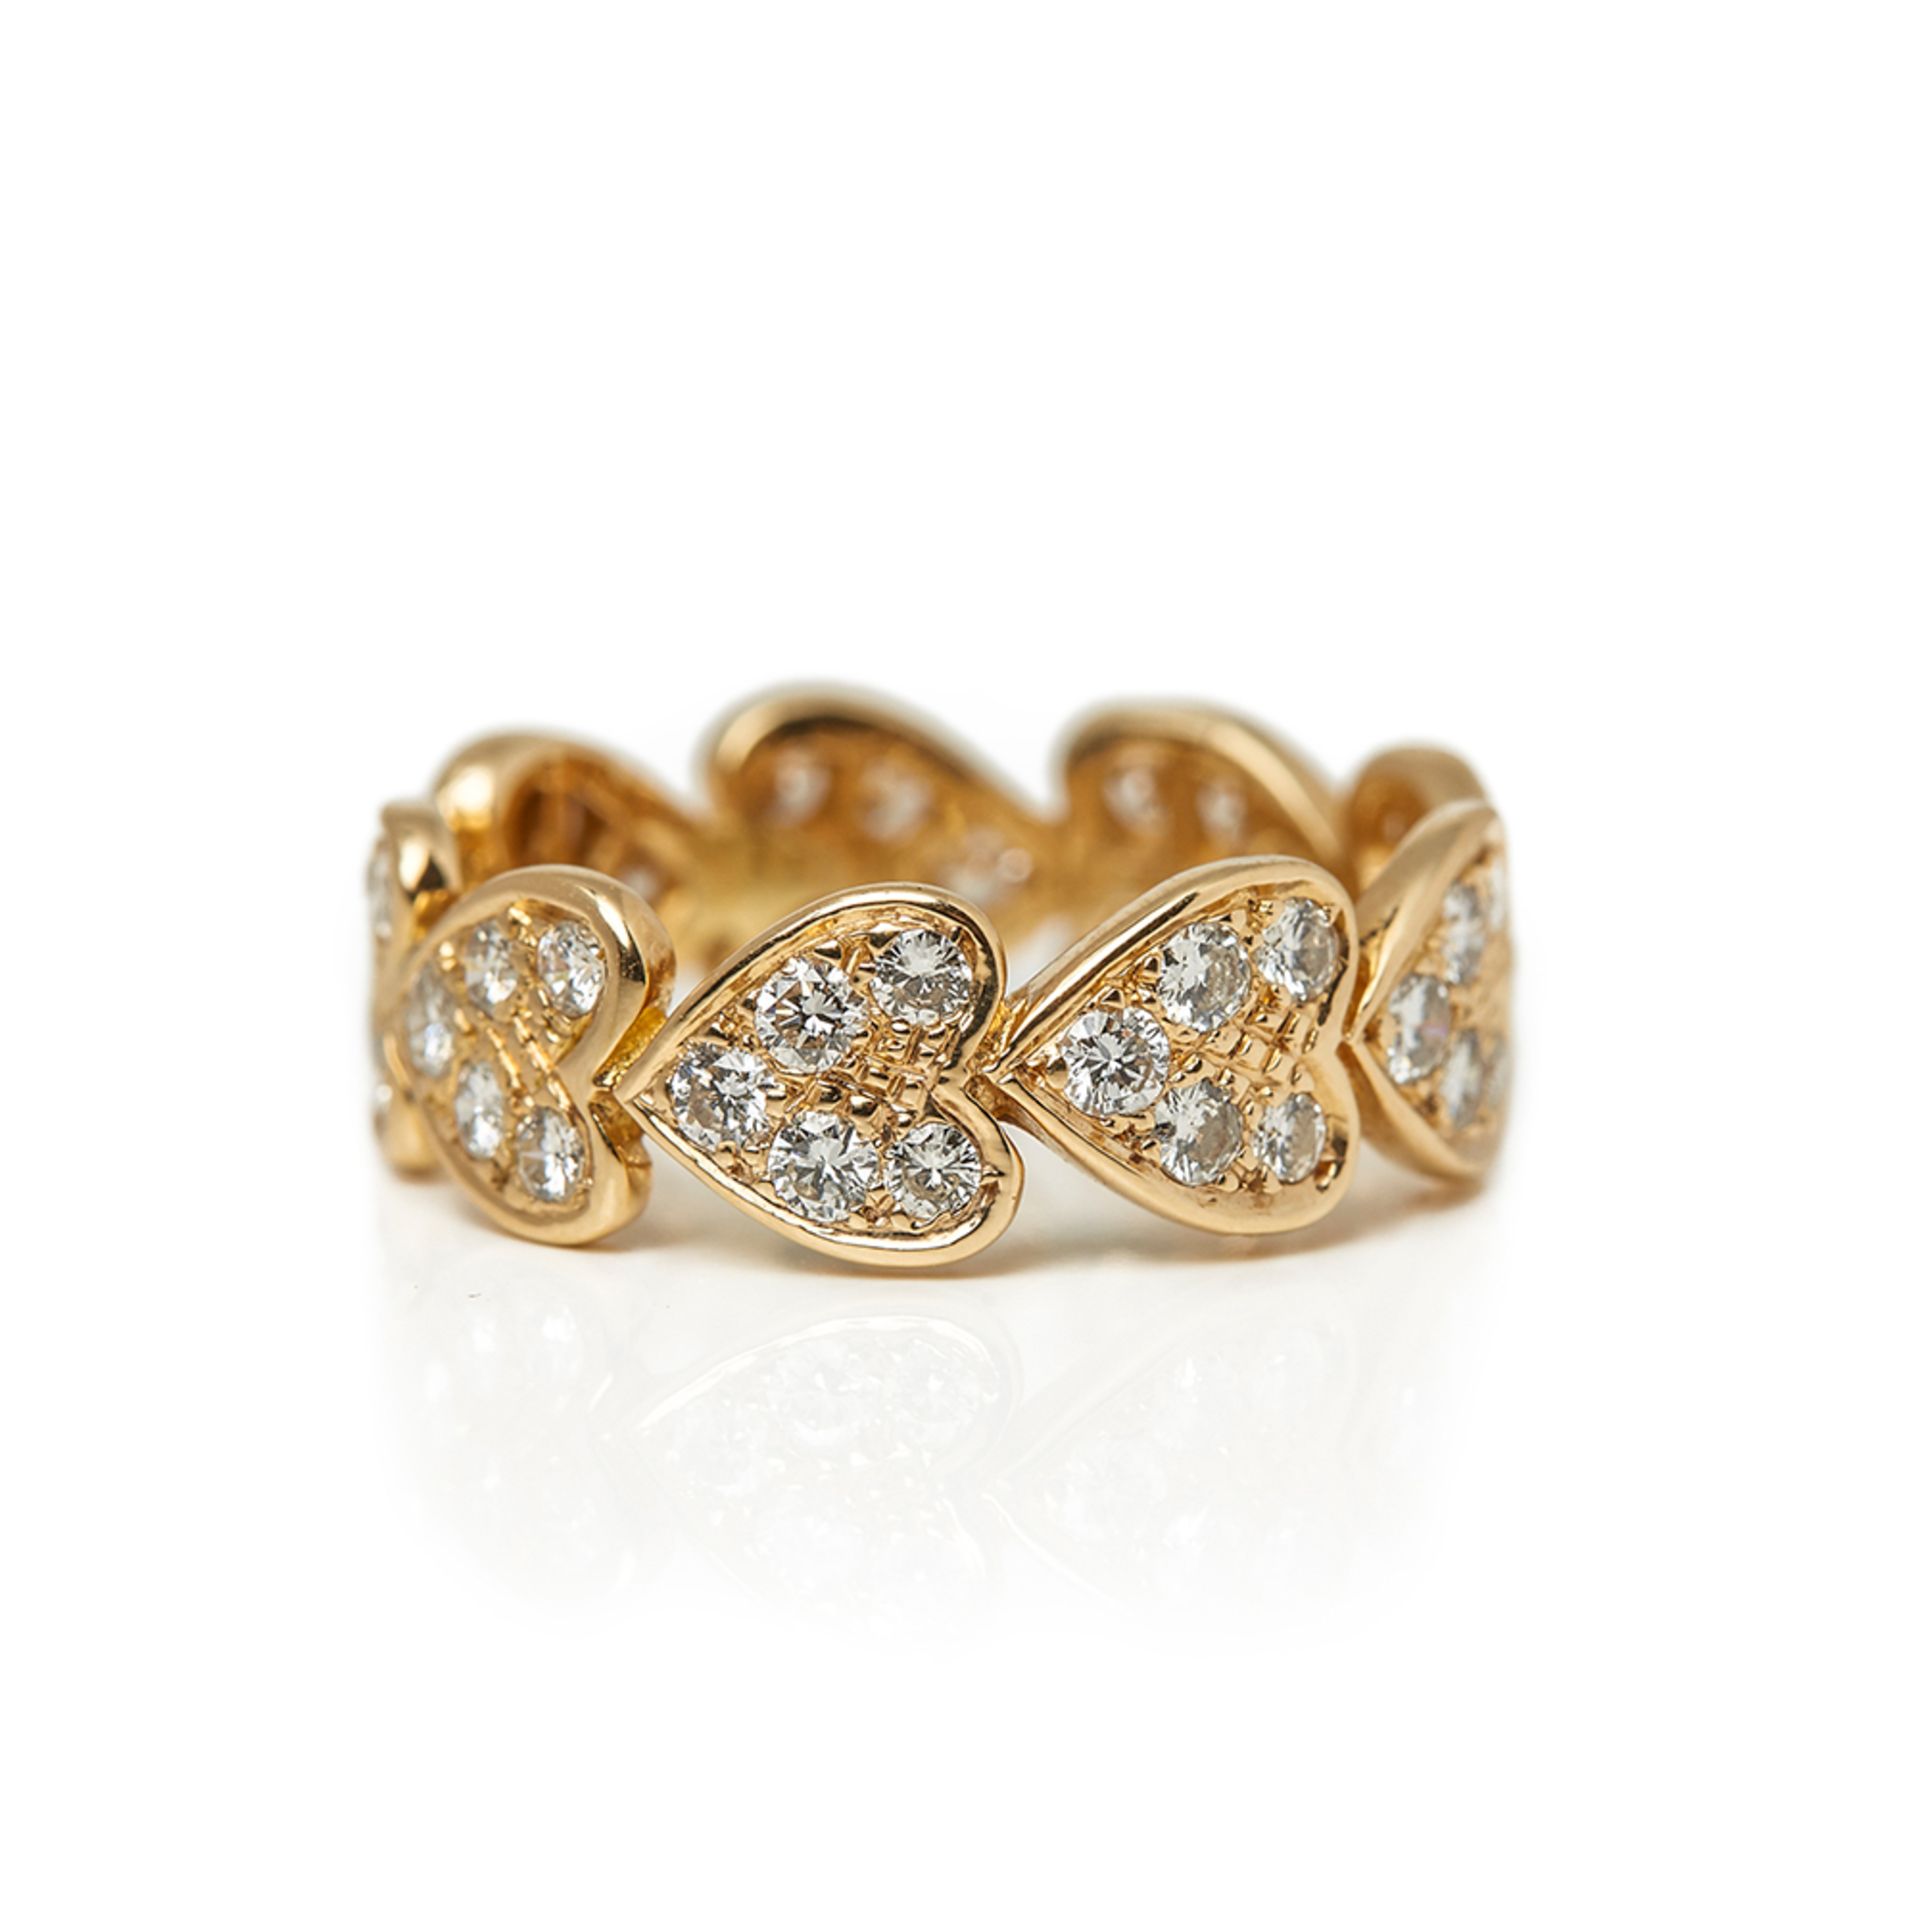 Cartier, 18k Yellow Gold Diamond Heart Ring - Image 4 of 9